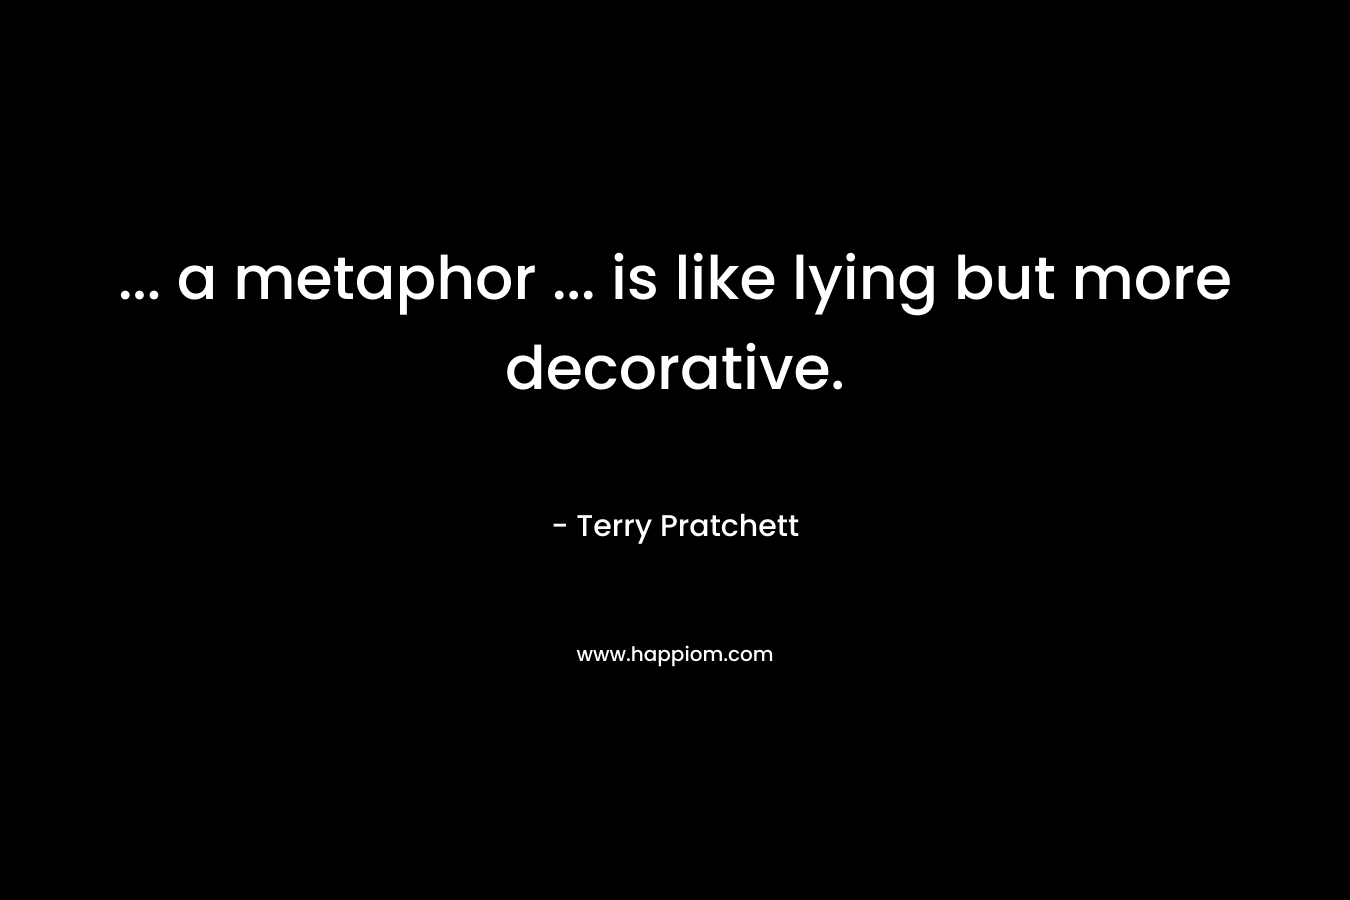 ... a metaphor ... is like lying but more decorative.